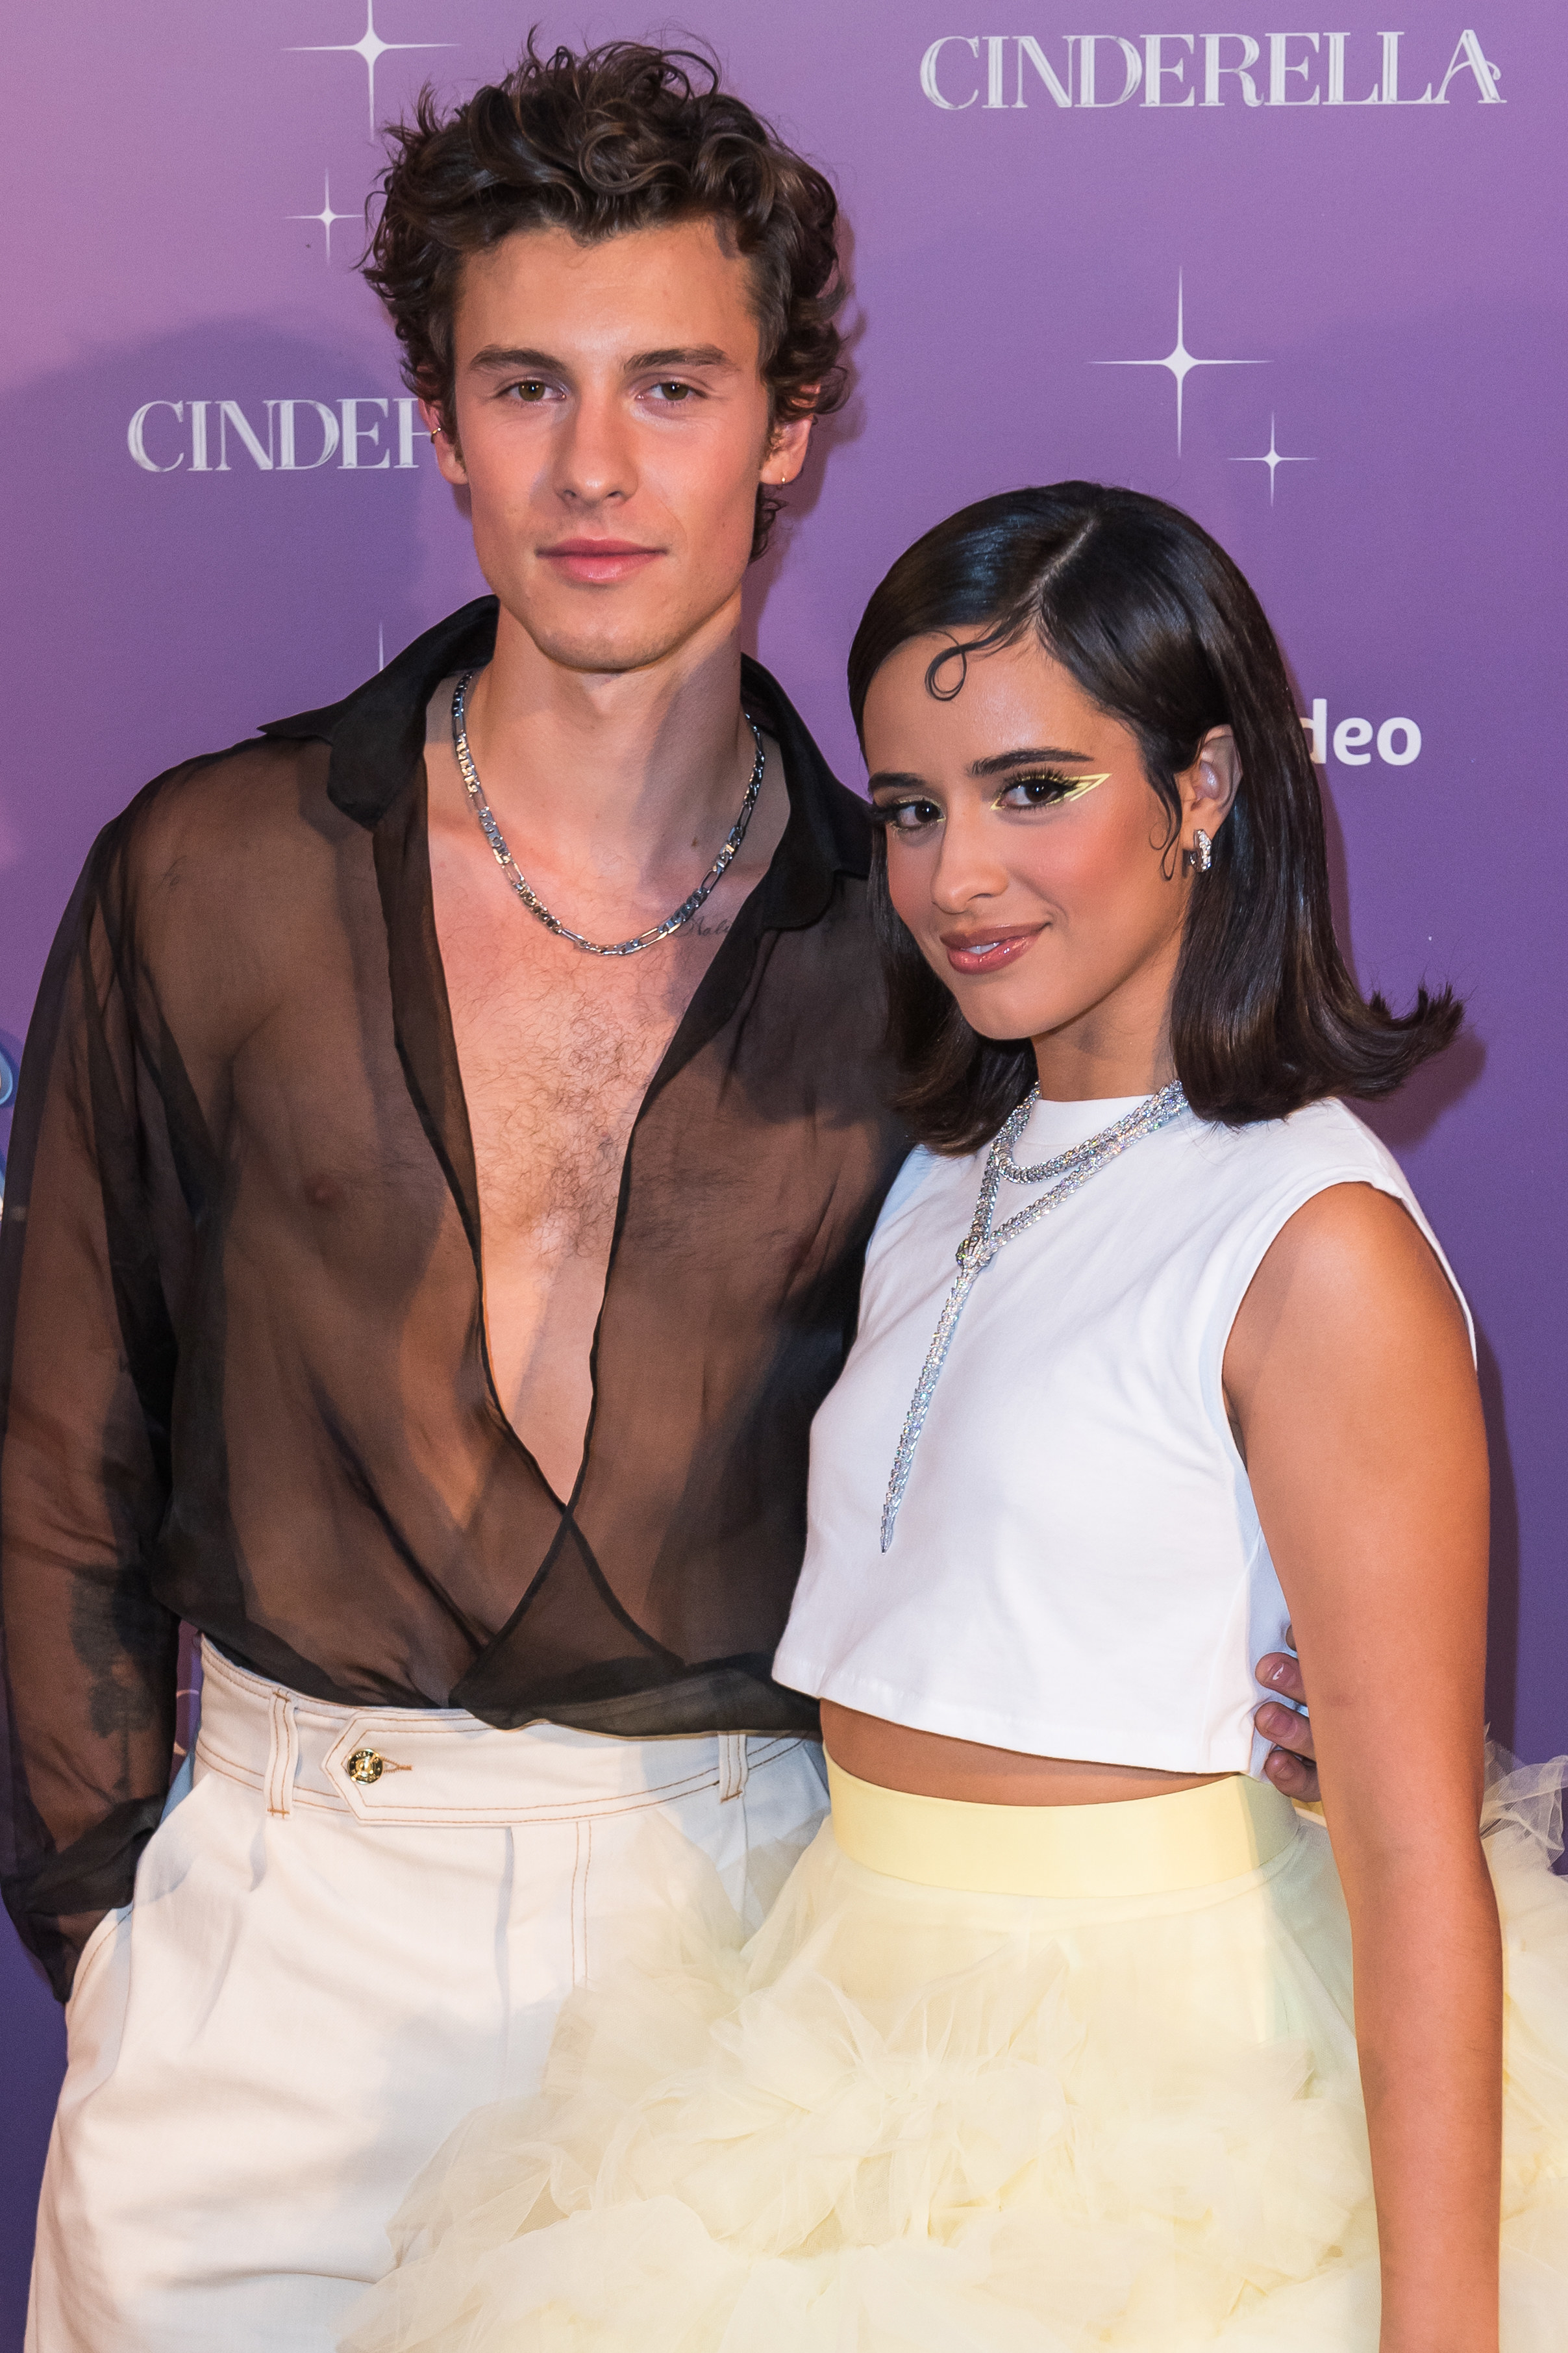 Mendes poses for a photo next to Cabello at an event